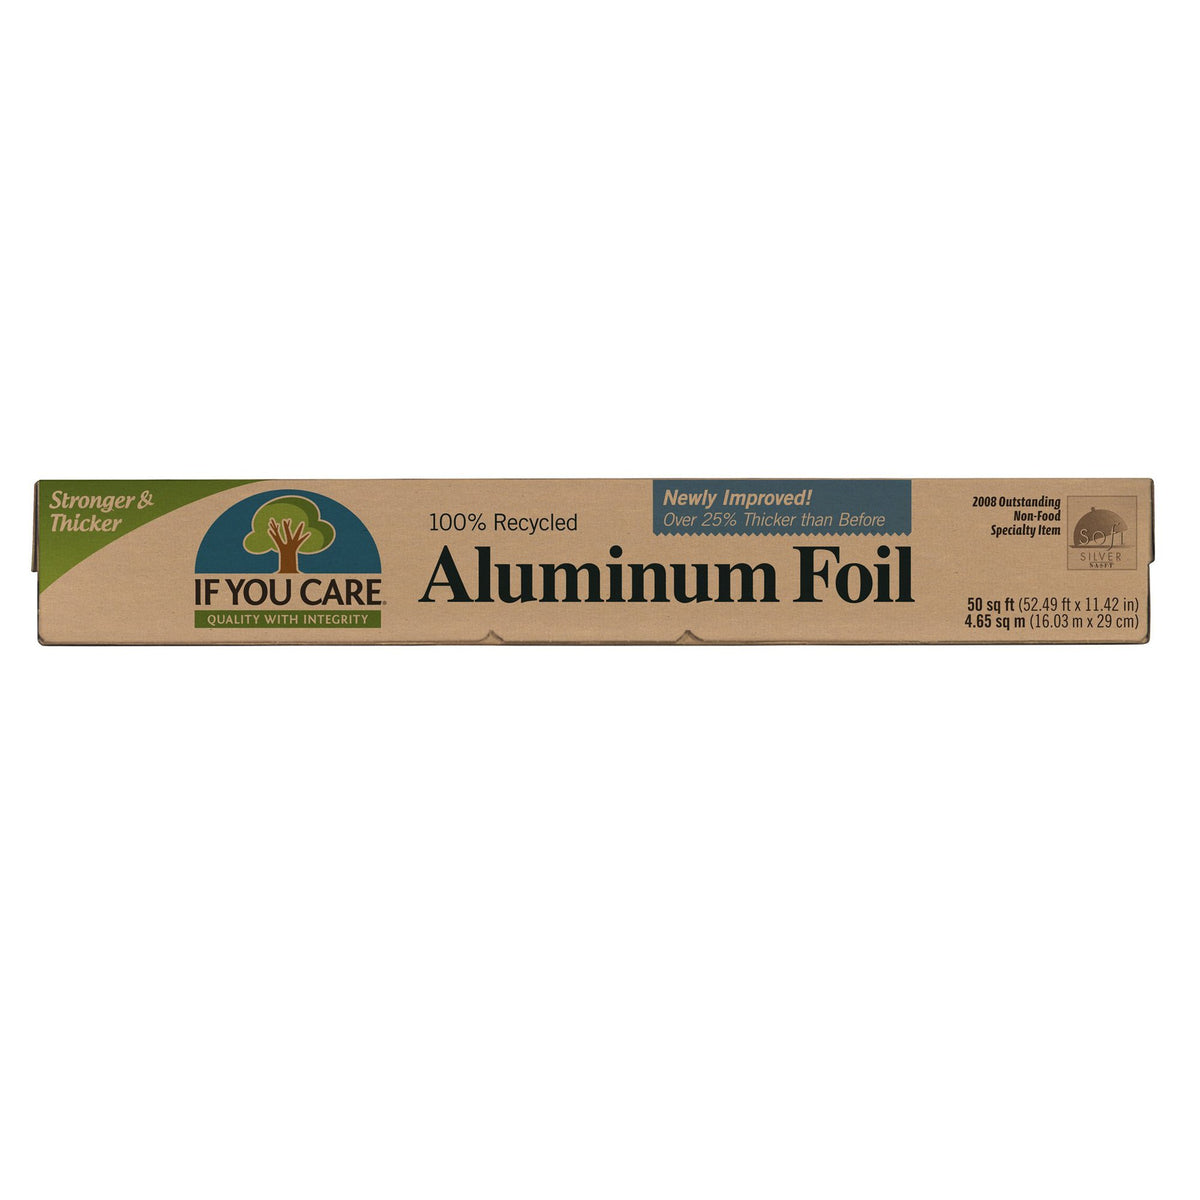 100% Recycled Aluminum Foil by If You Care, 50 square feet